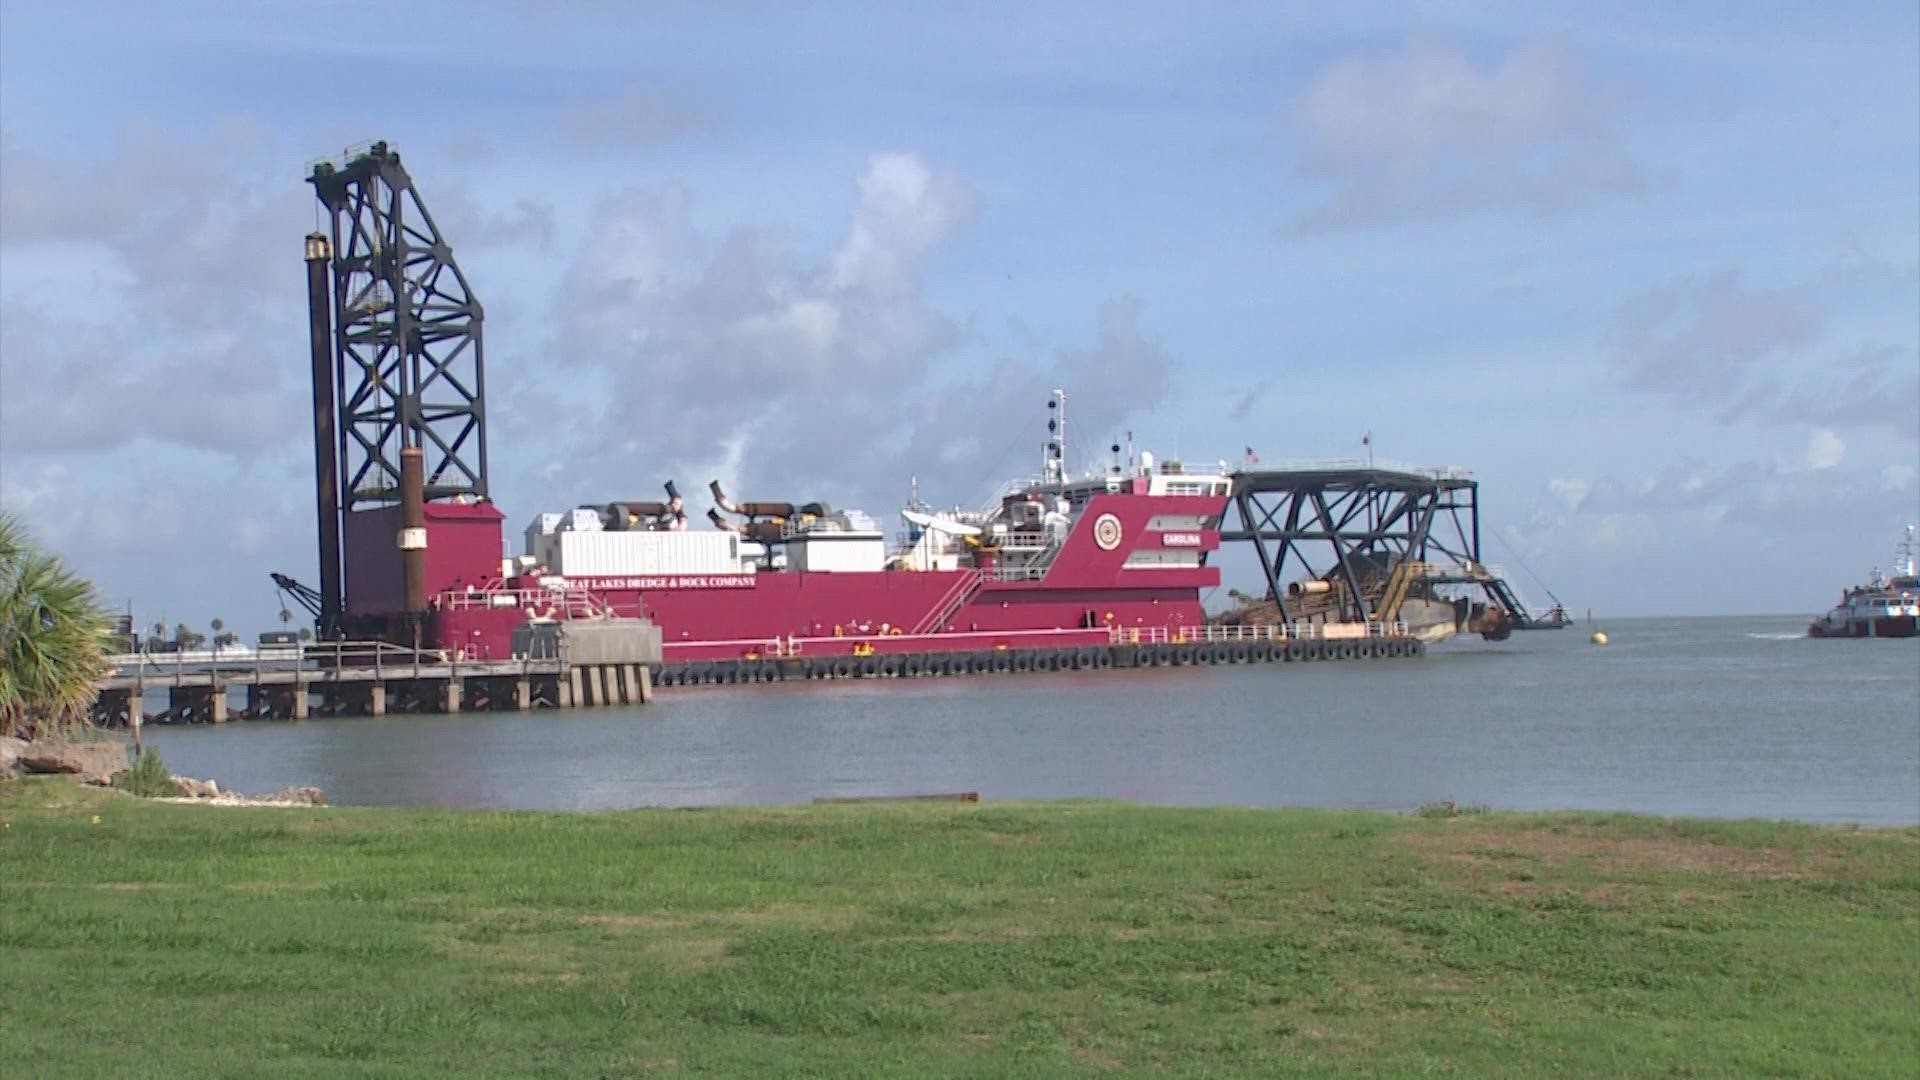 "Project 11" will widen and deepen the Houston Ship Channel in phases over the next 3.5 years.